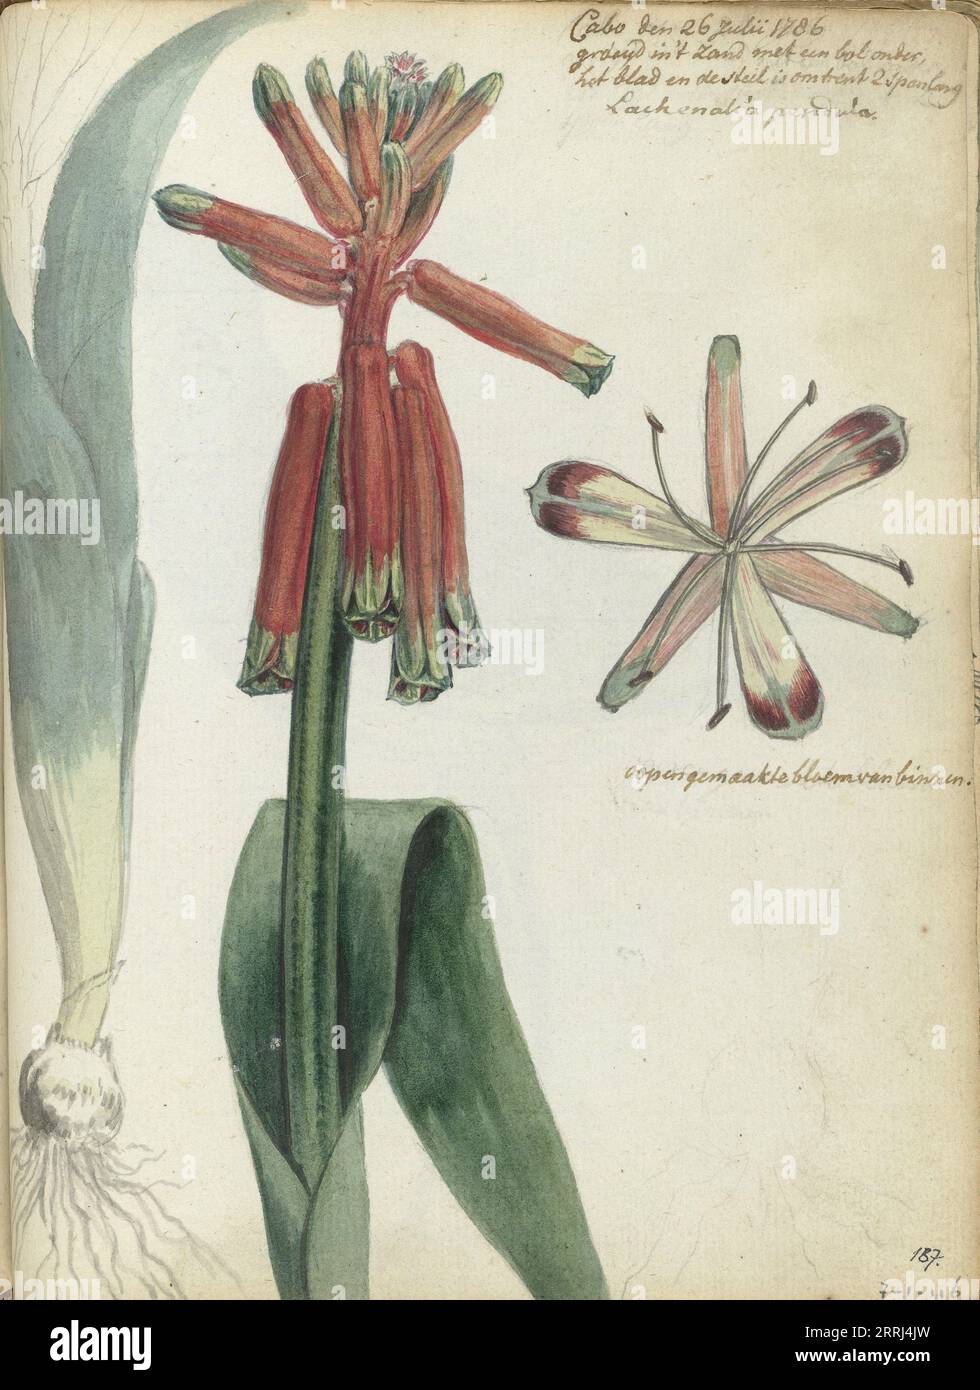 Cape flower, (Lachenalia pendula), 1786. Plant that occurs on the Cape of Good Hope. Showing the plant as a whole with bulb and roots, flower with open petals. With inscription. Part of Jan Brandes' sketchbook, dl. 1 (1808), p. 187. Stock Photo